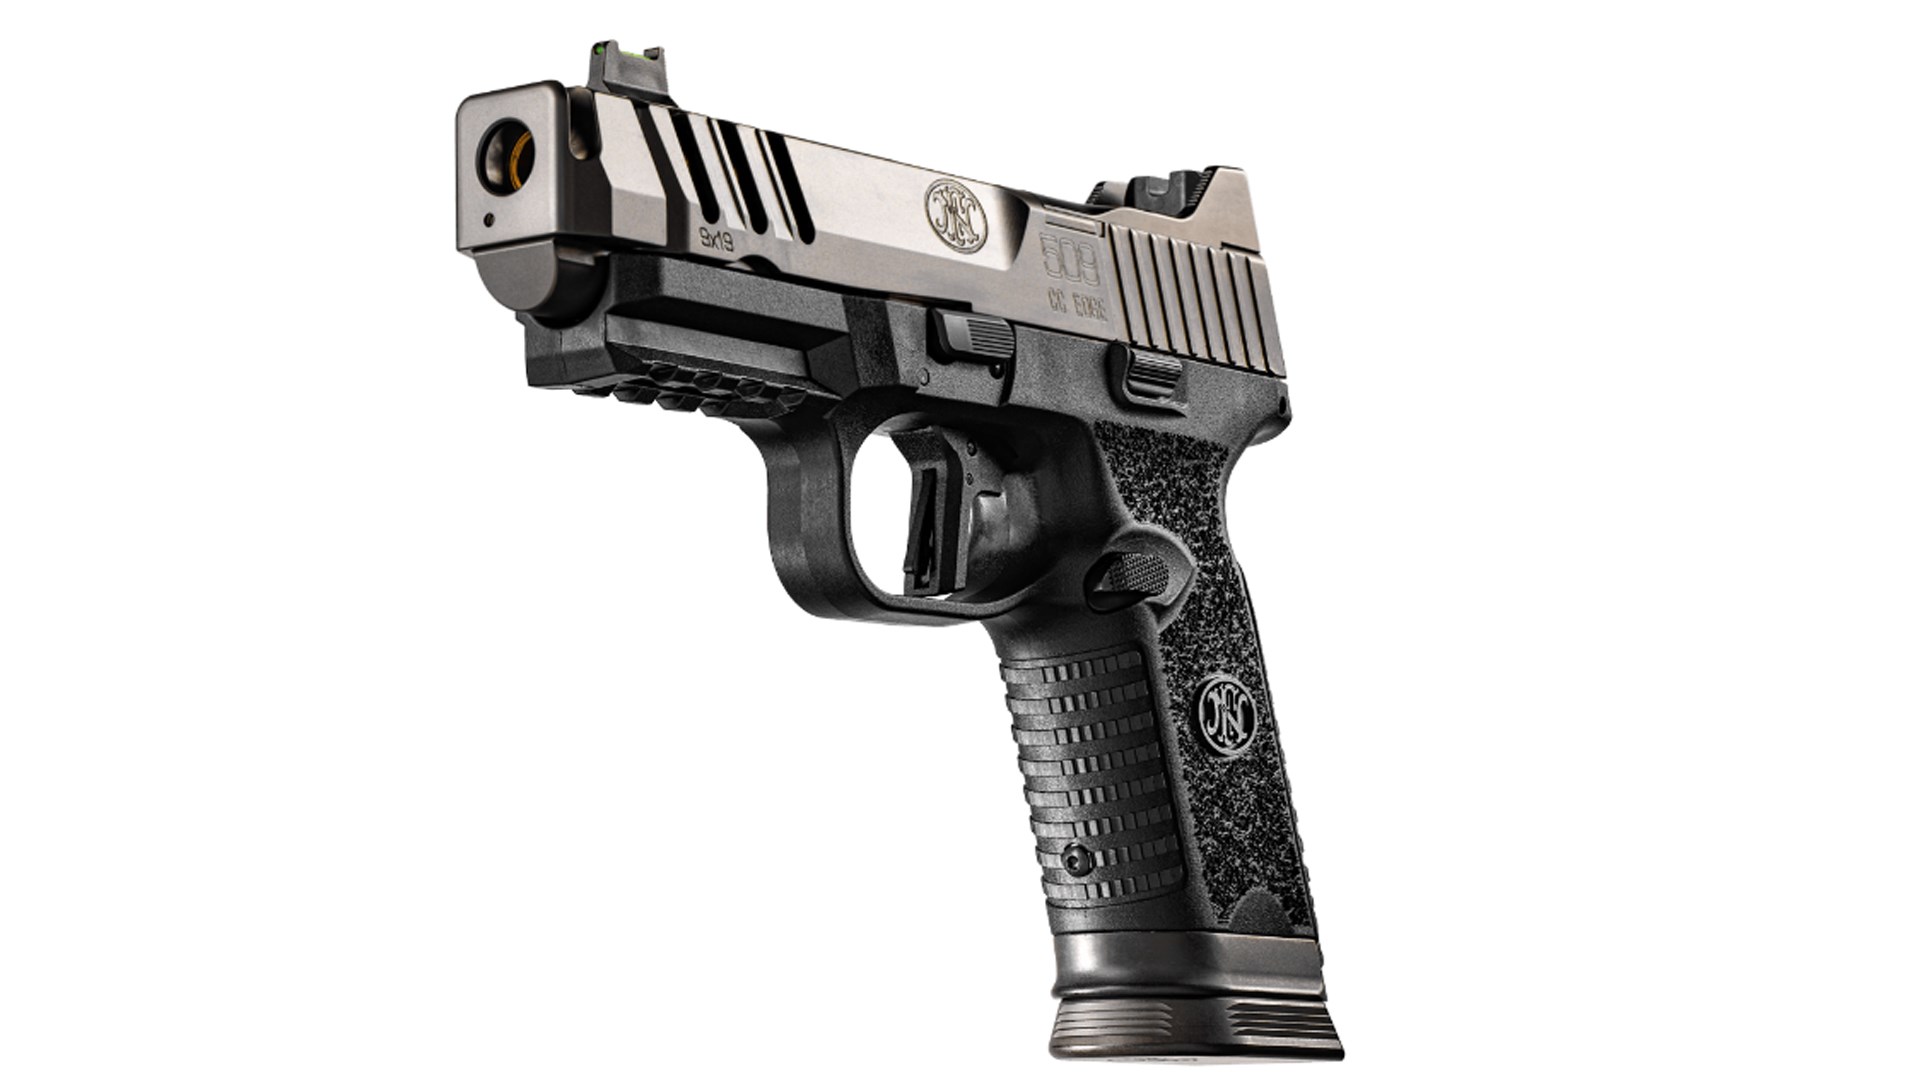 Angled front view of the FN 509 CC Edge XL handgun.